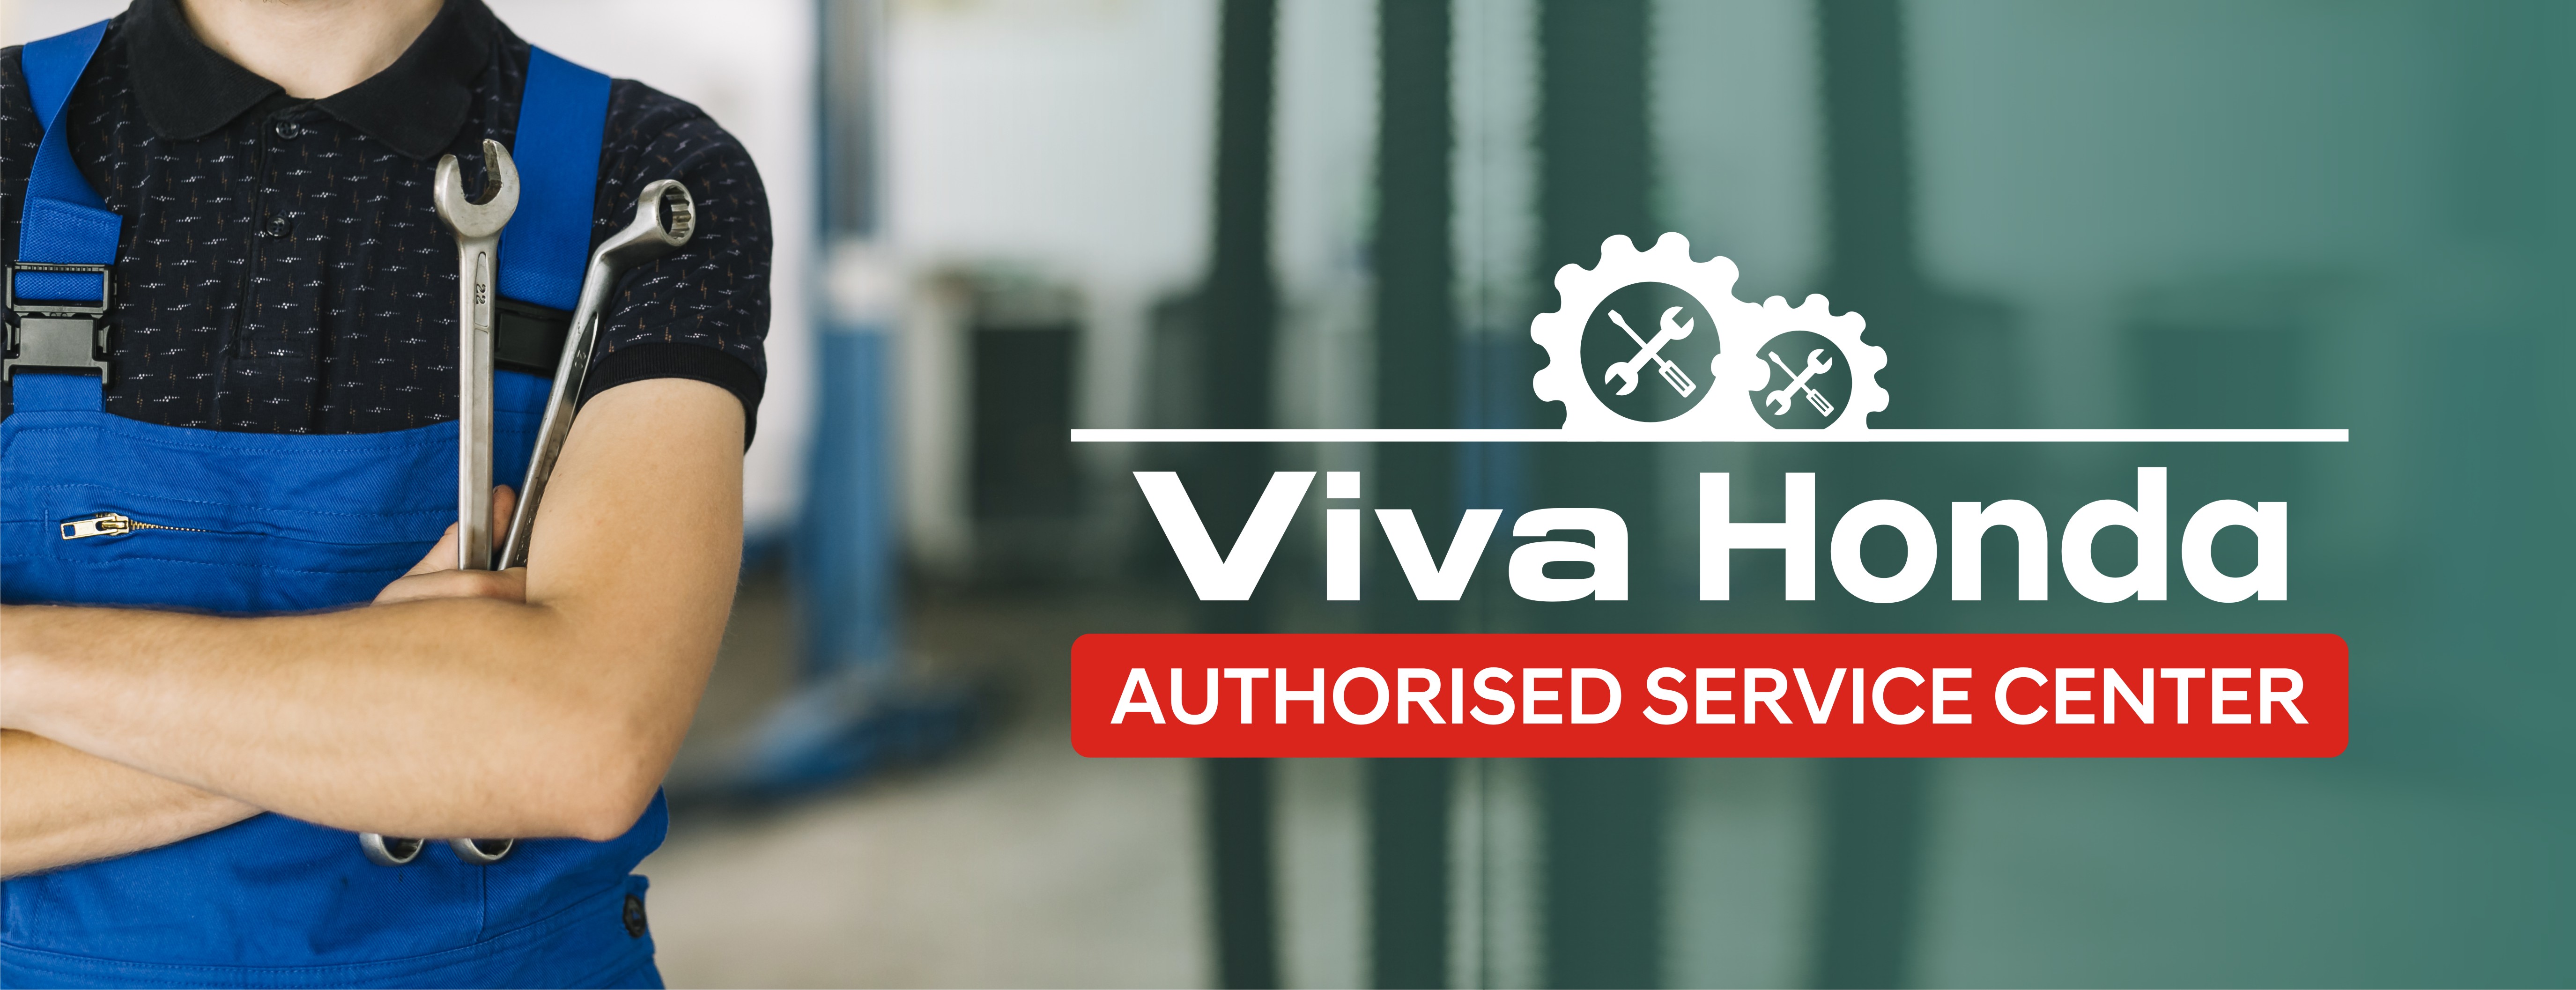 Viva Honda  Book A Service Appointment  Booking Tools